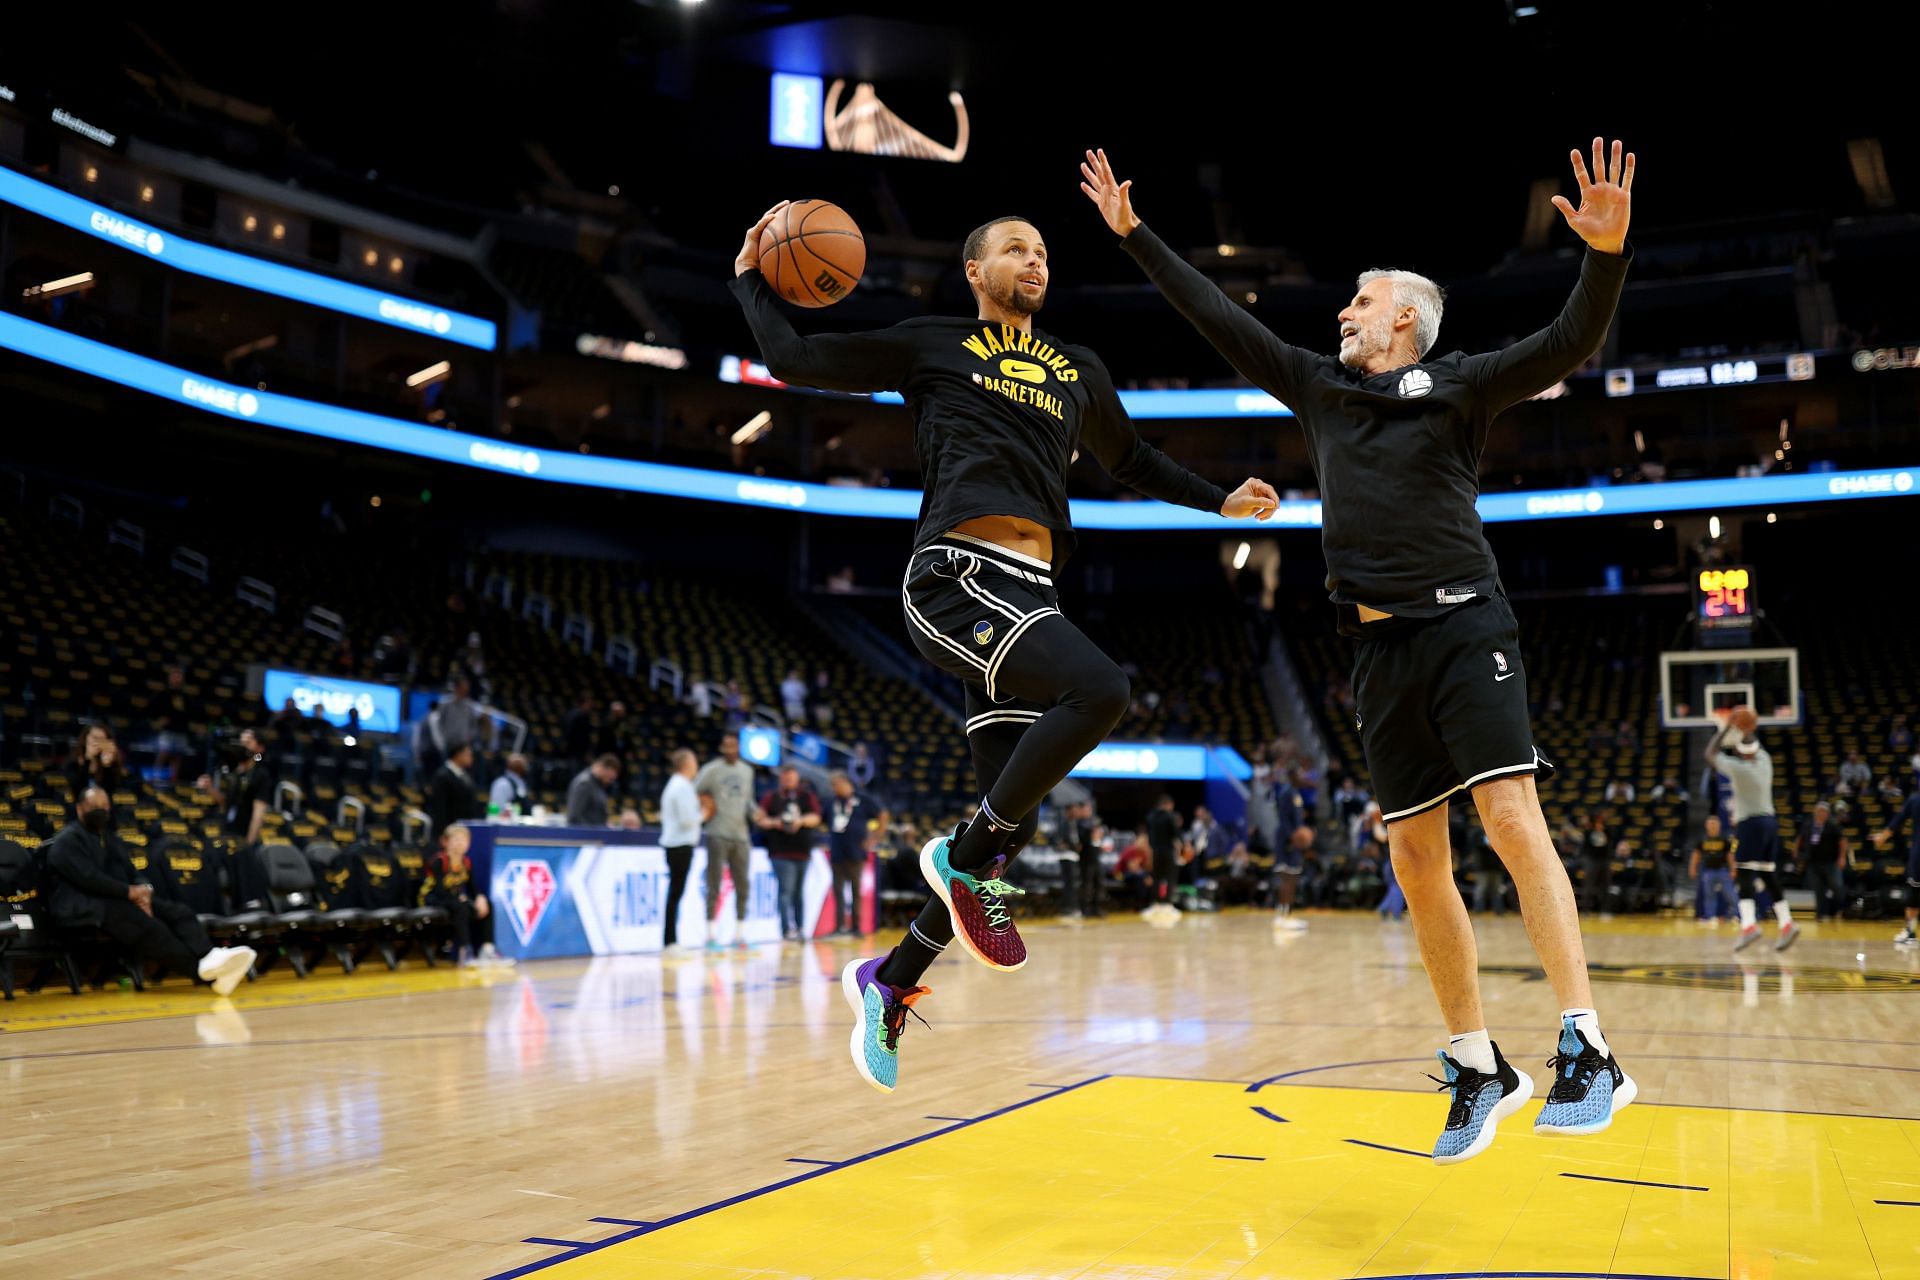 Steph Curry warms up ahead of a playoff game